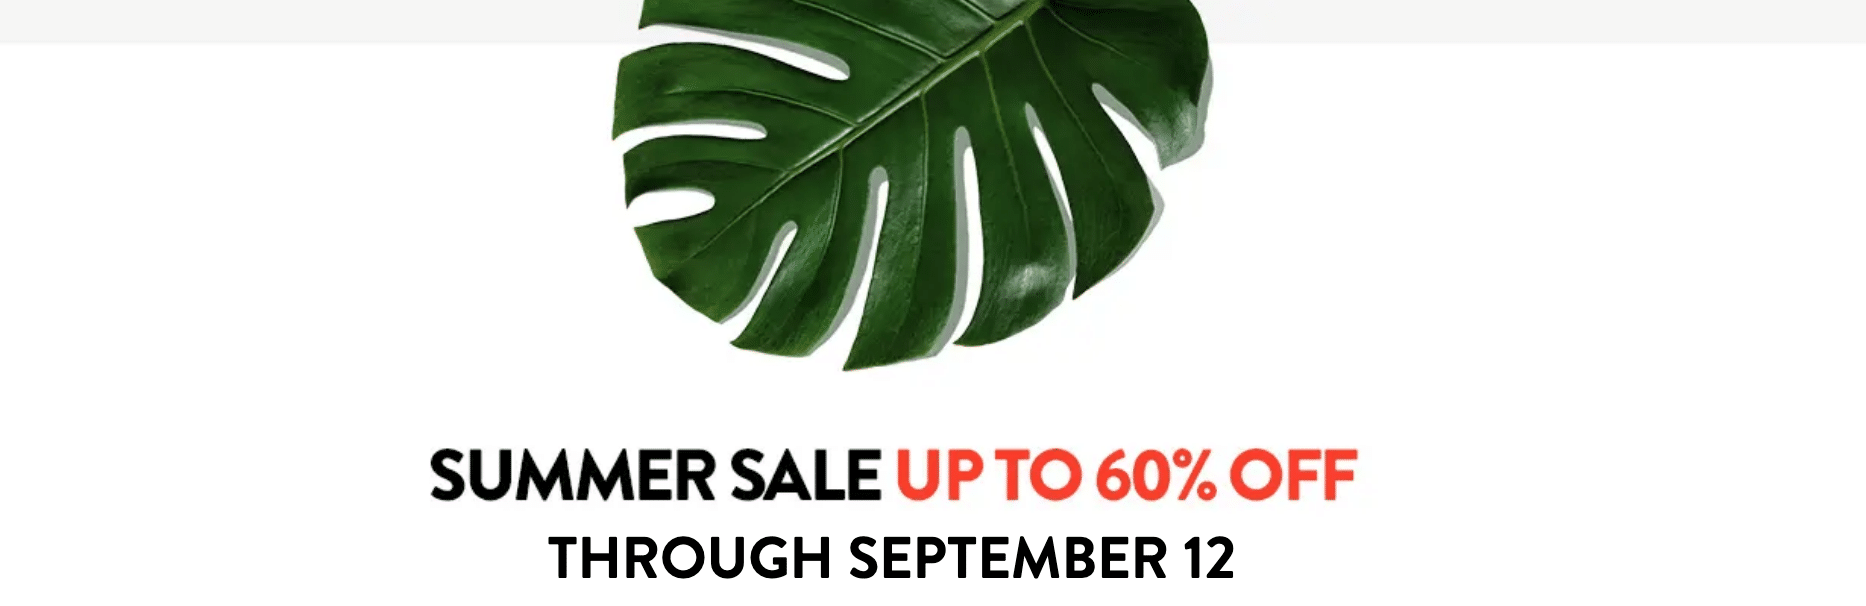 August sale at Nordstrom